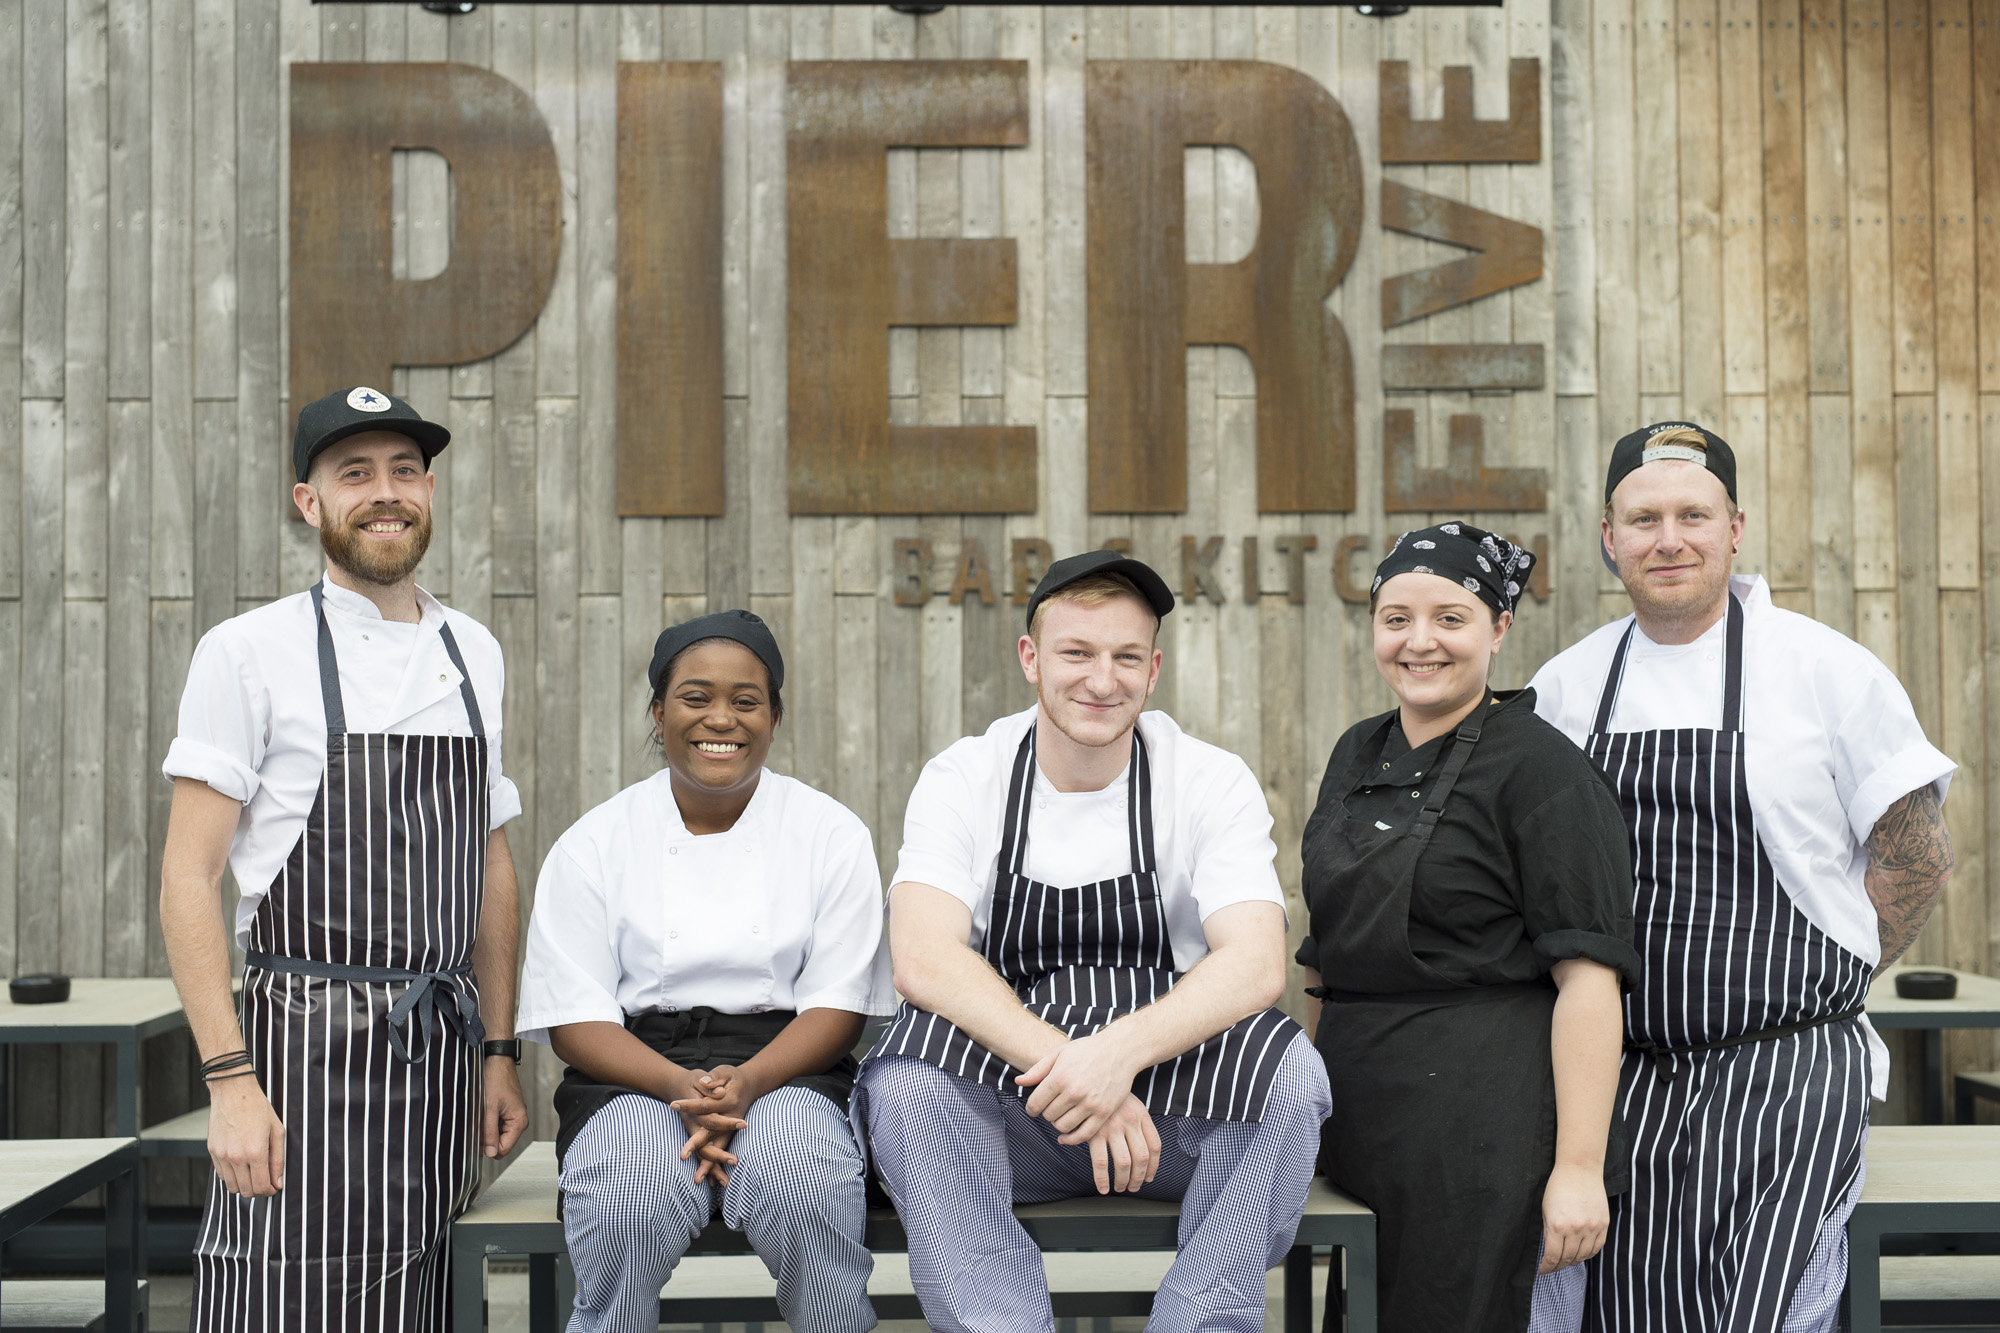 Our chefs at Pier Five